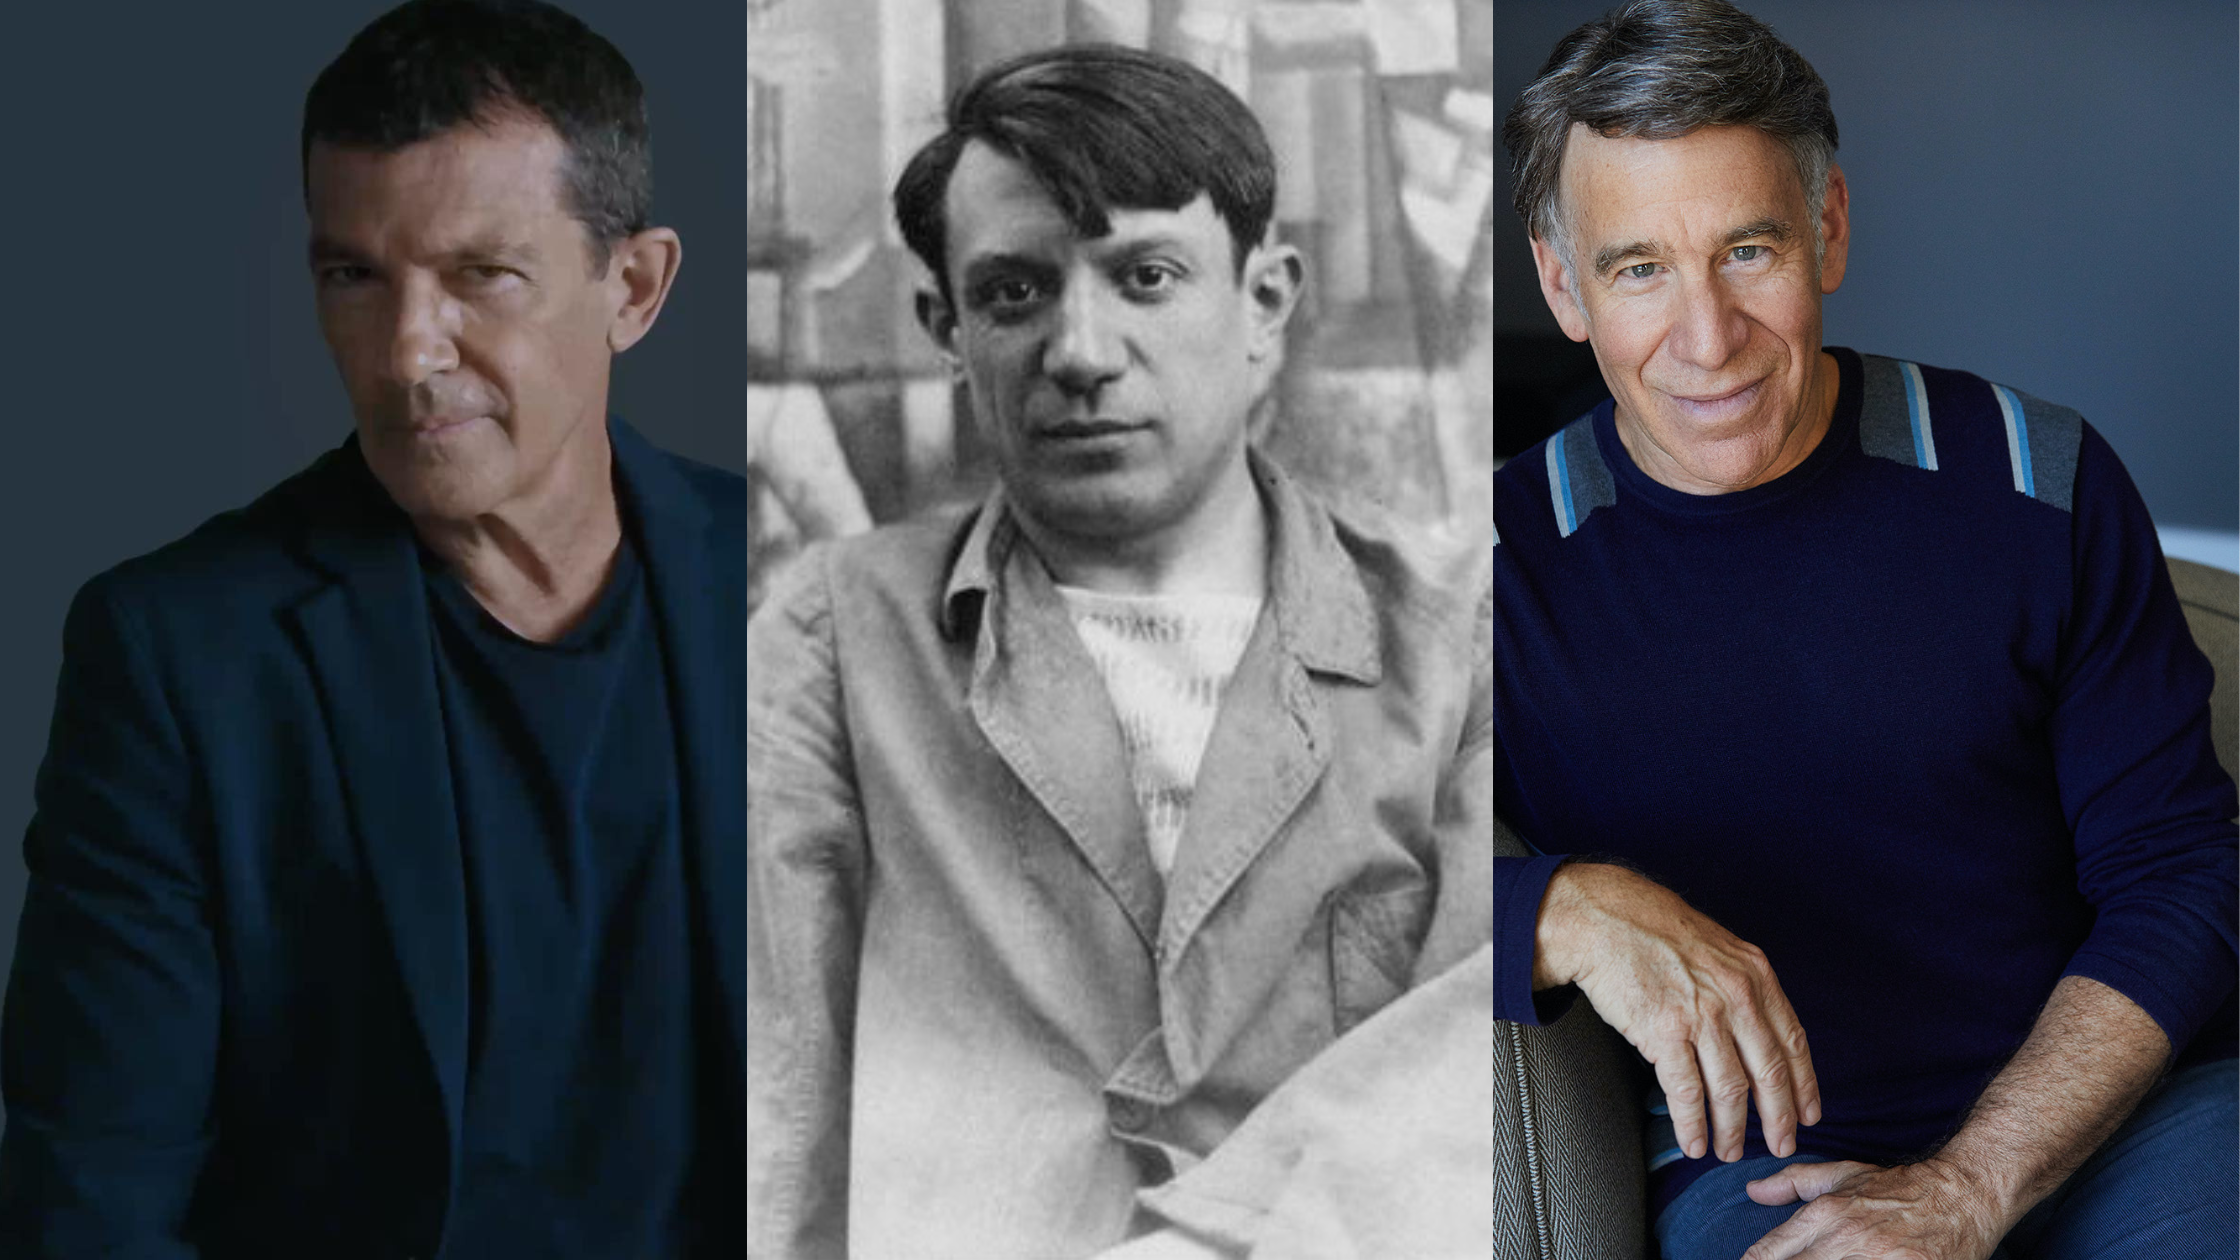 Picasso Musical in the Works with Antonio Banderas and Stephen Schwartz